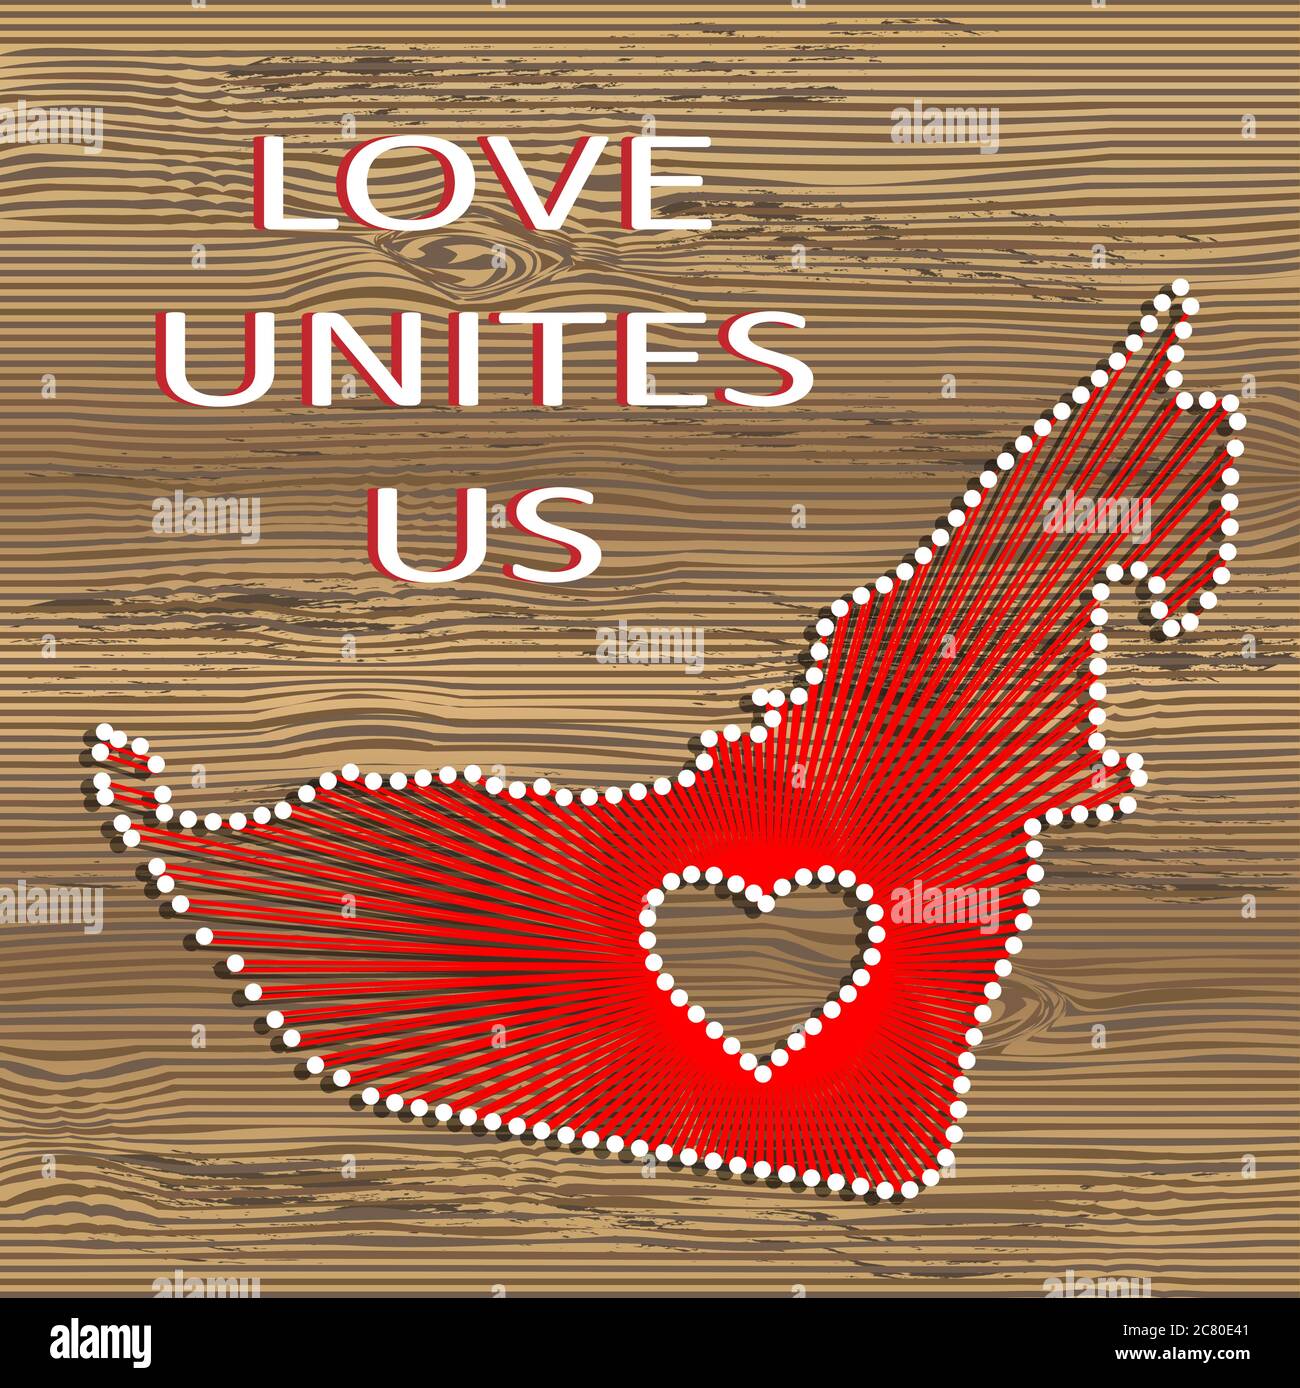 United arab emirates art vector map with heart. String art, yarn and pins on wooden board texture. Love unites us. Message of love. UAE art map Stock Vector